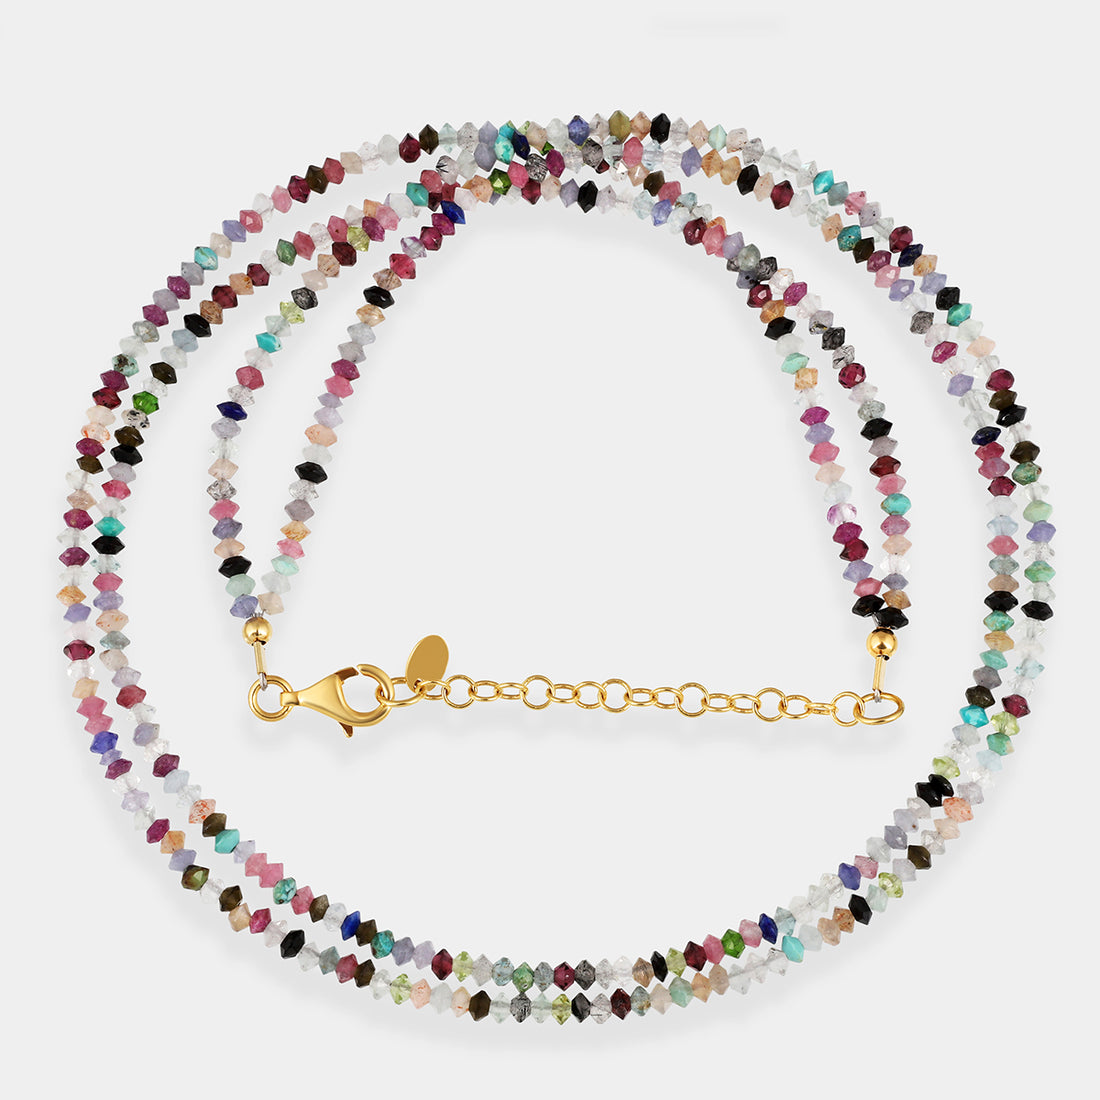 Multi Gemstone Saucer Beads Layered Silver Necklace